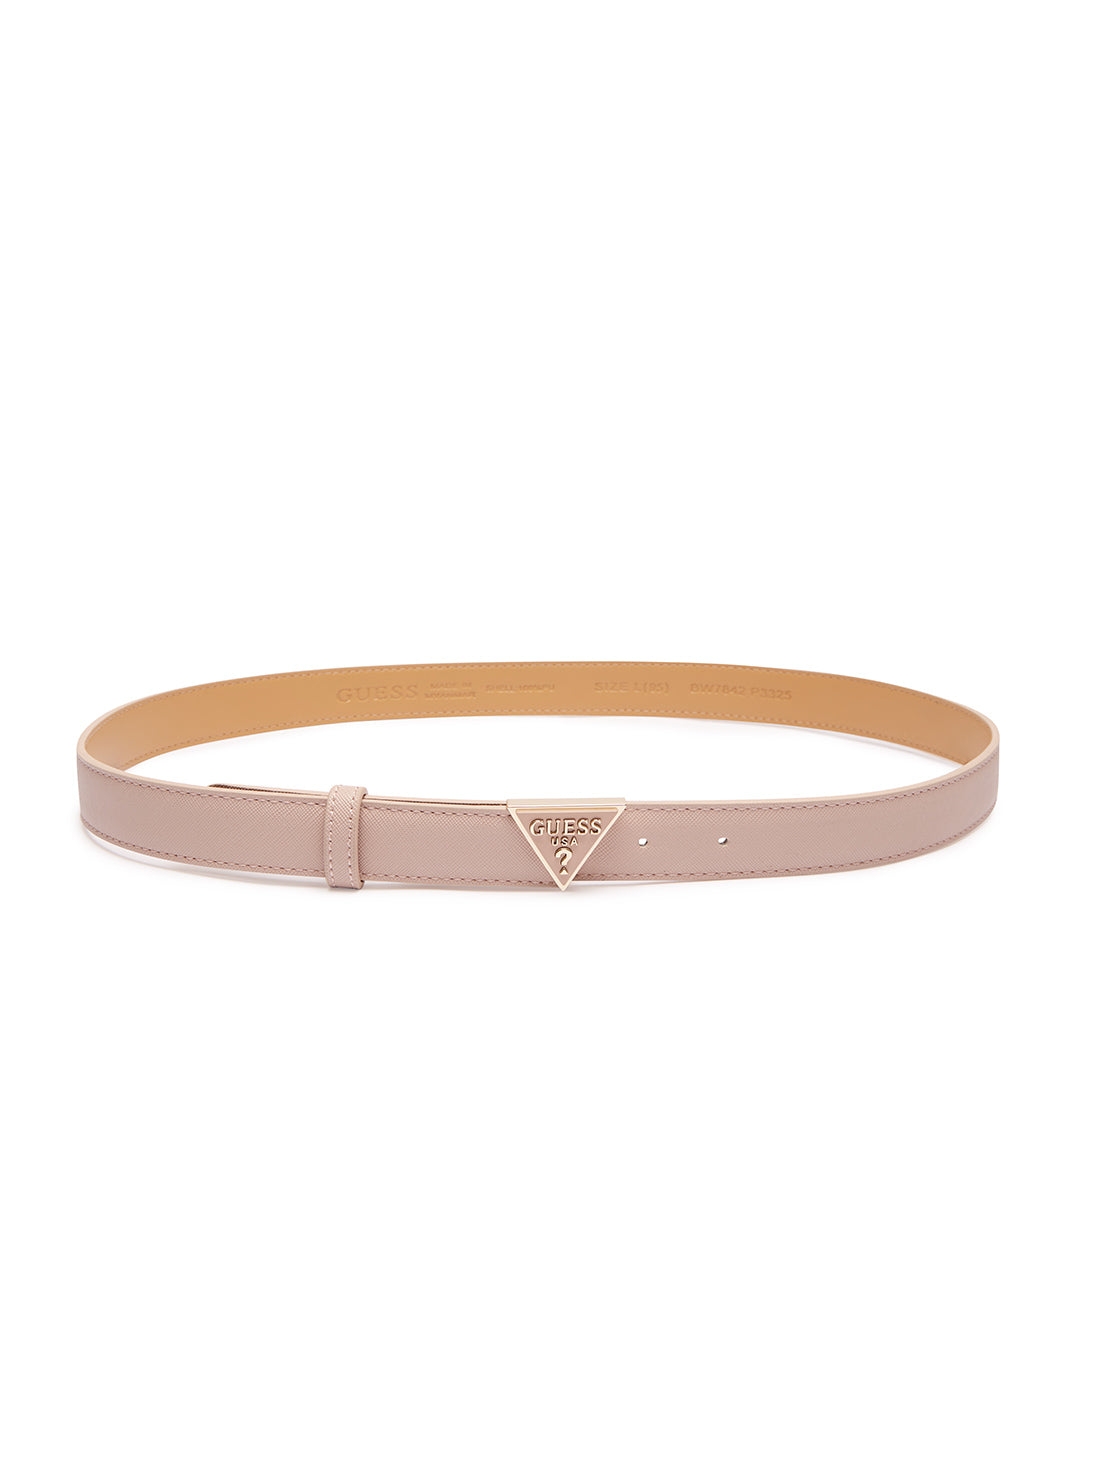 GUESS Nude Triangle Logo Belt full view